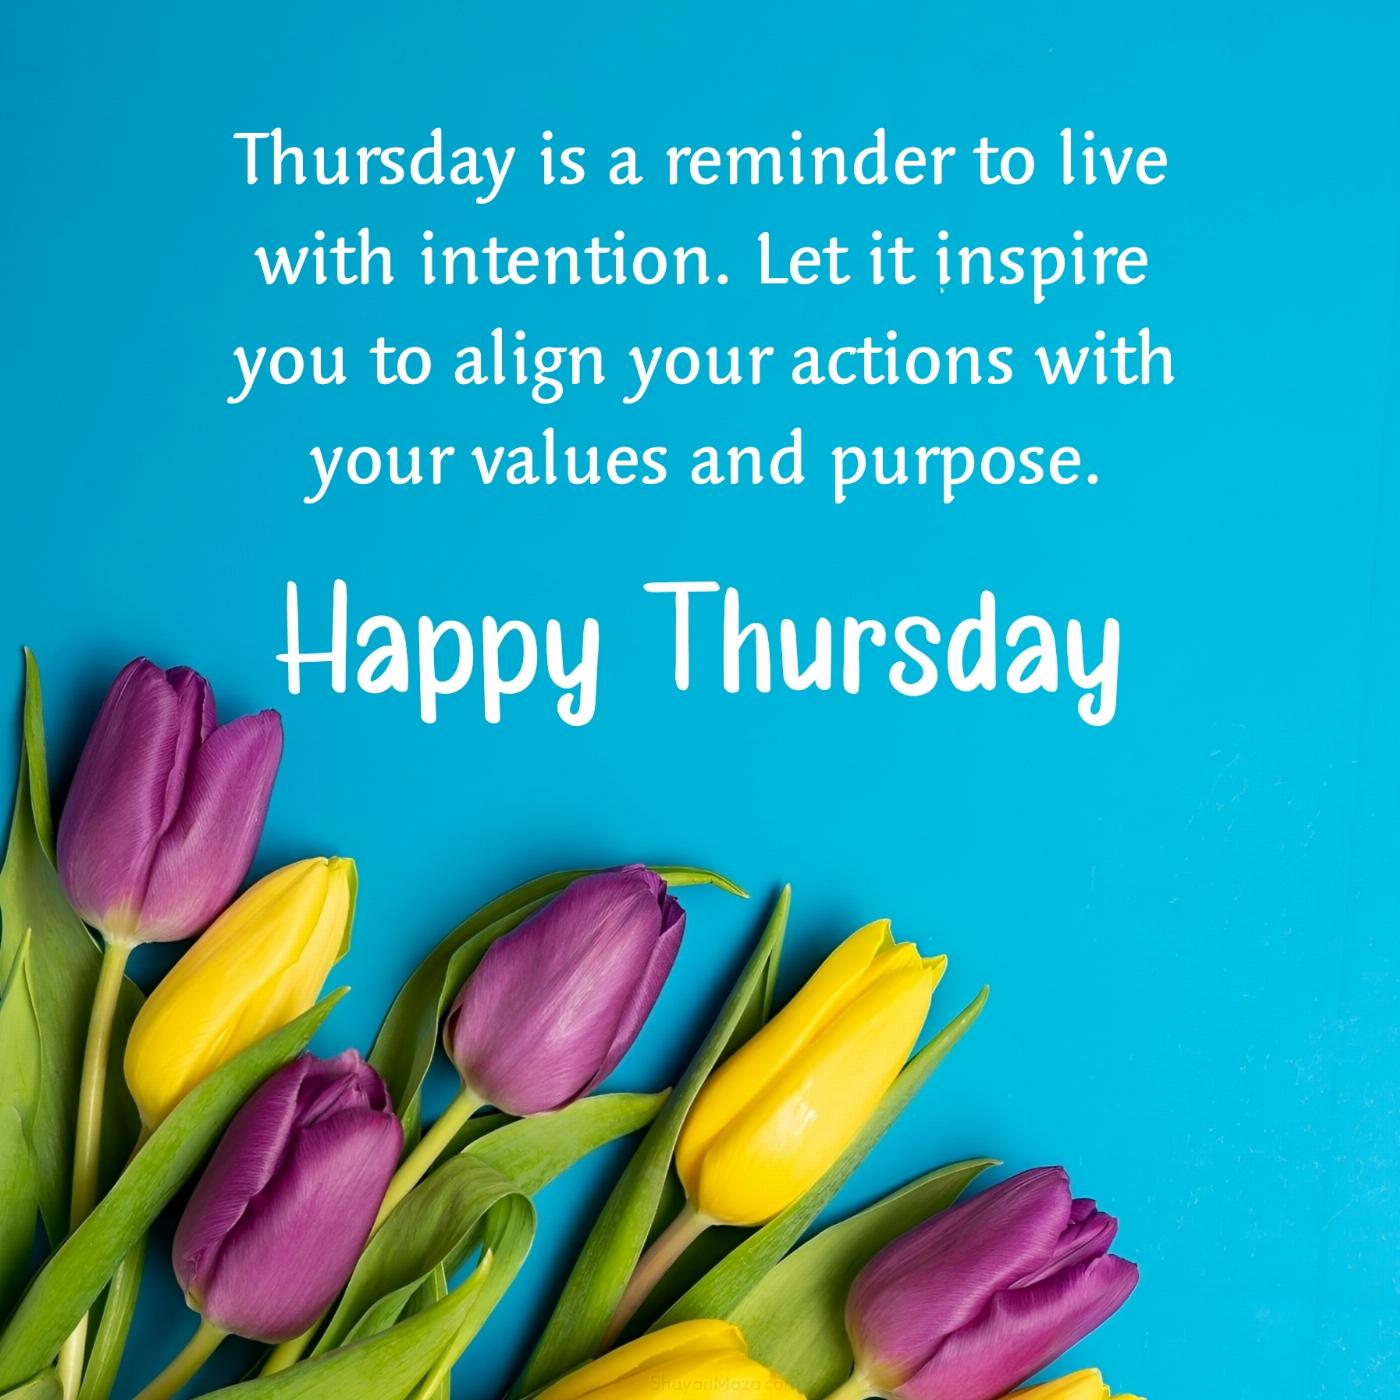 Thursday is a reminder to live with intention Let it inspire you